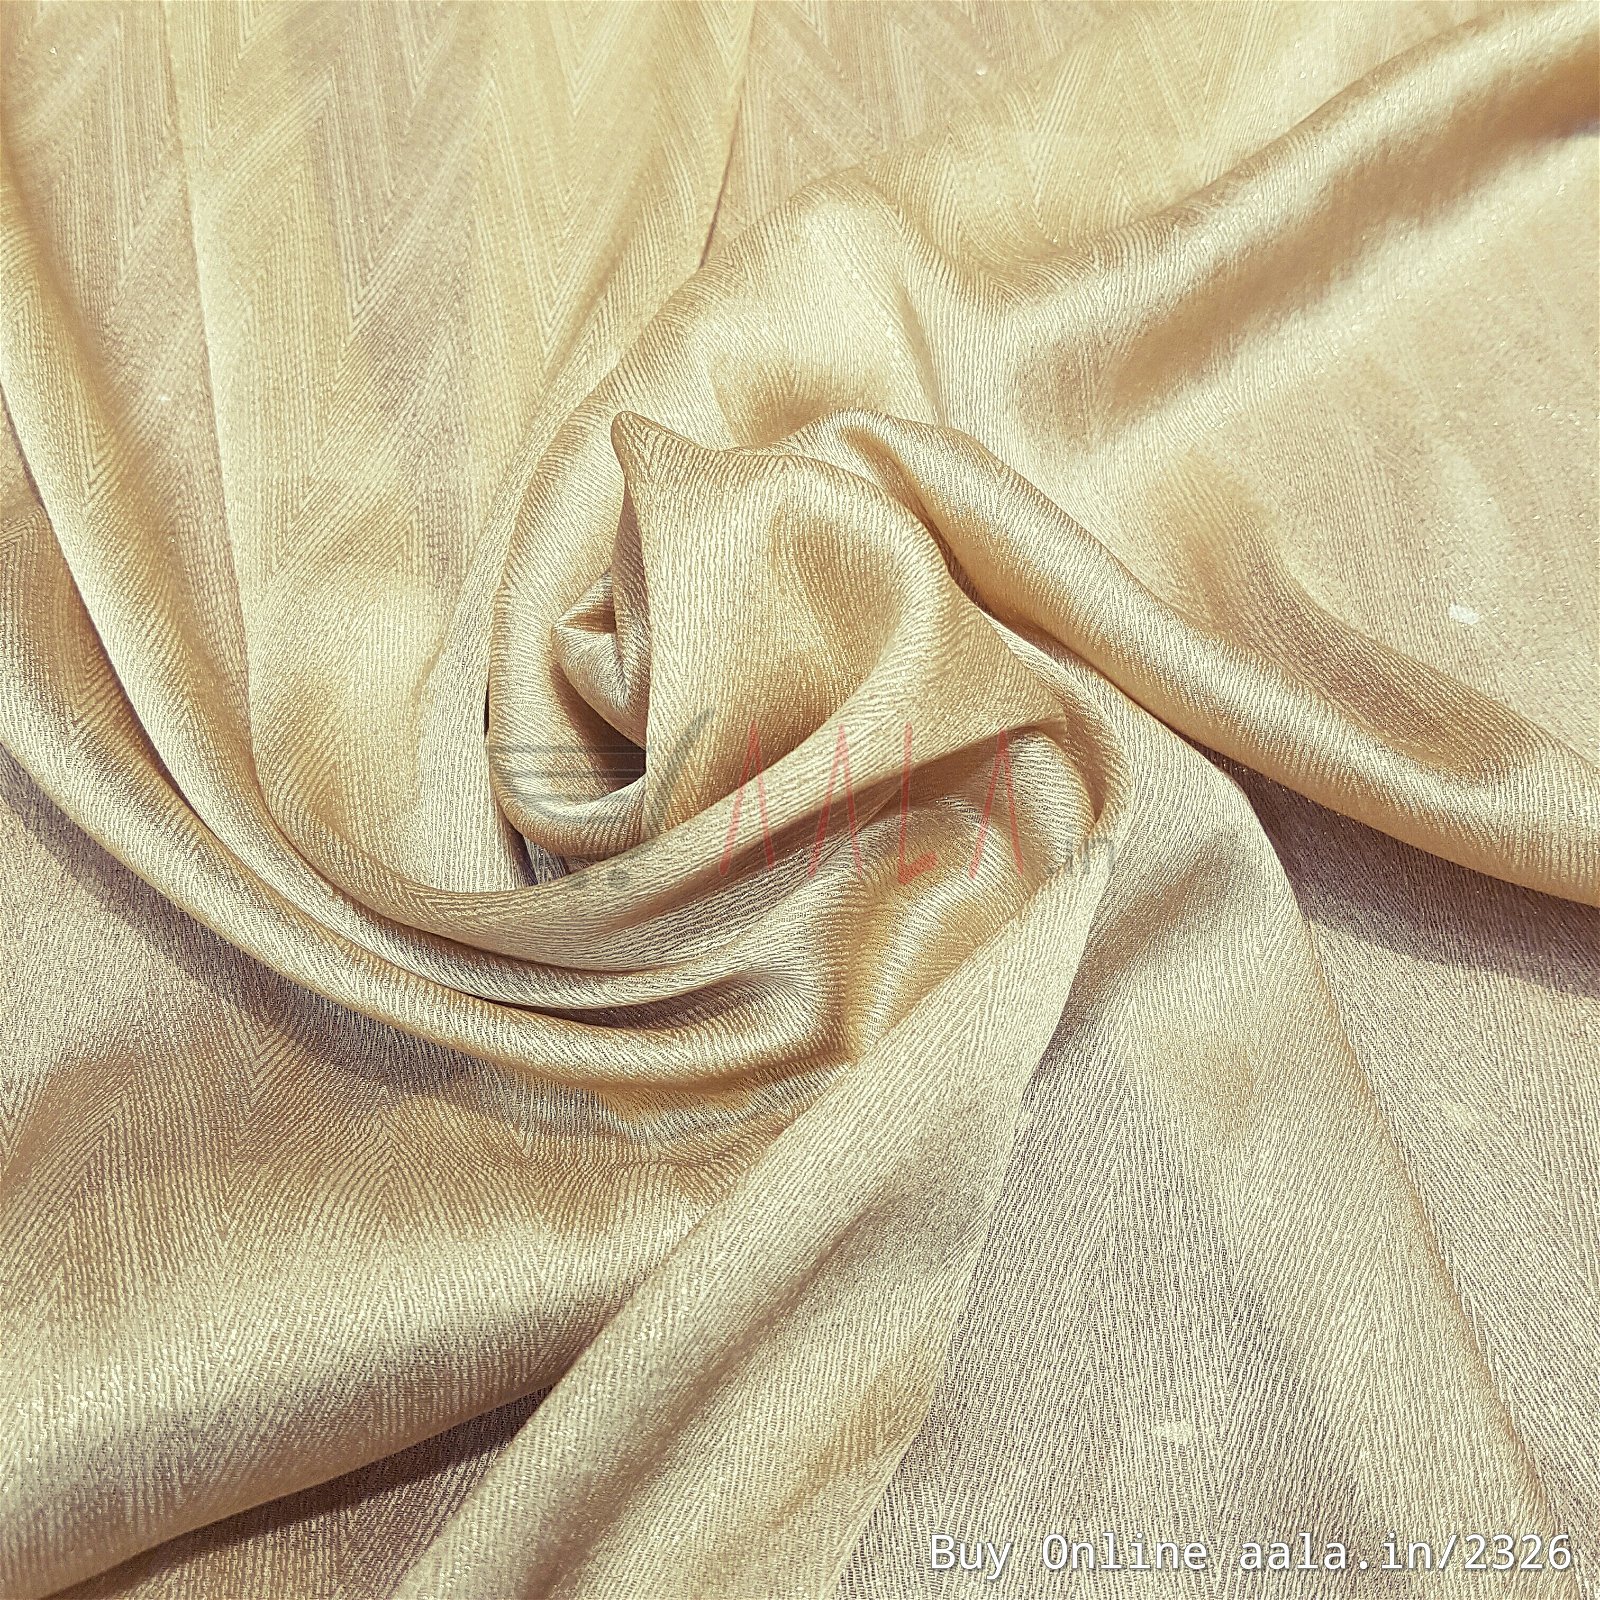 Foil Satin Georgette Poly-ester 44 Inches Dyed Per Metre #2326